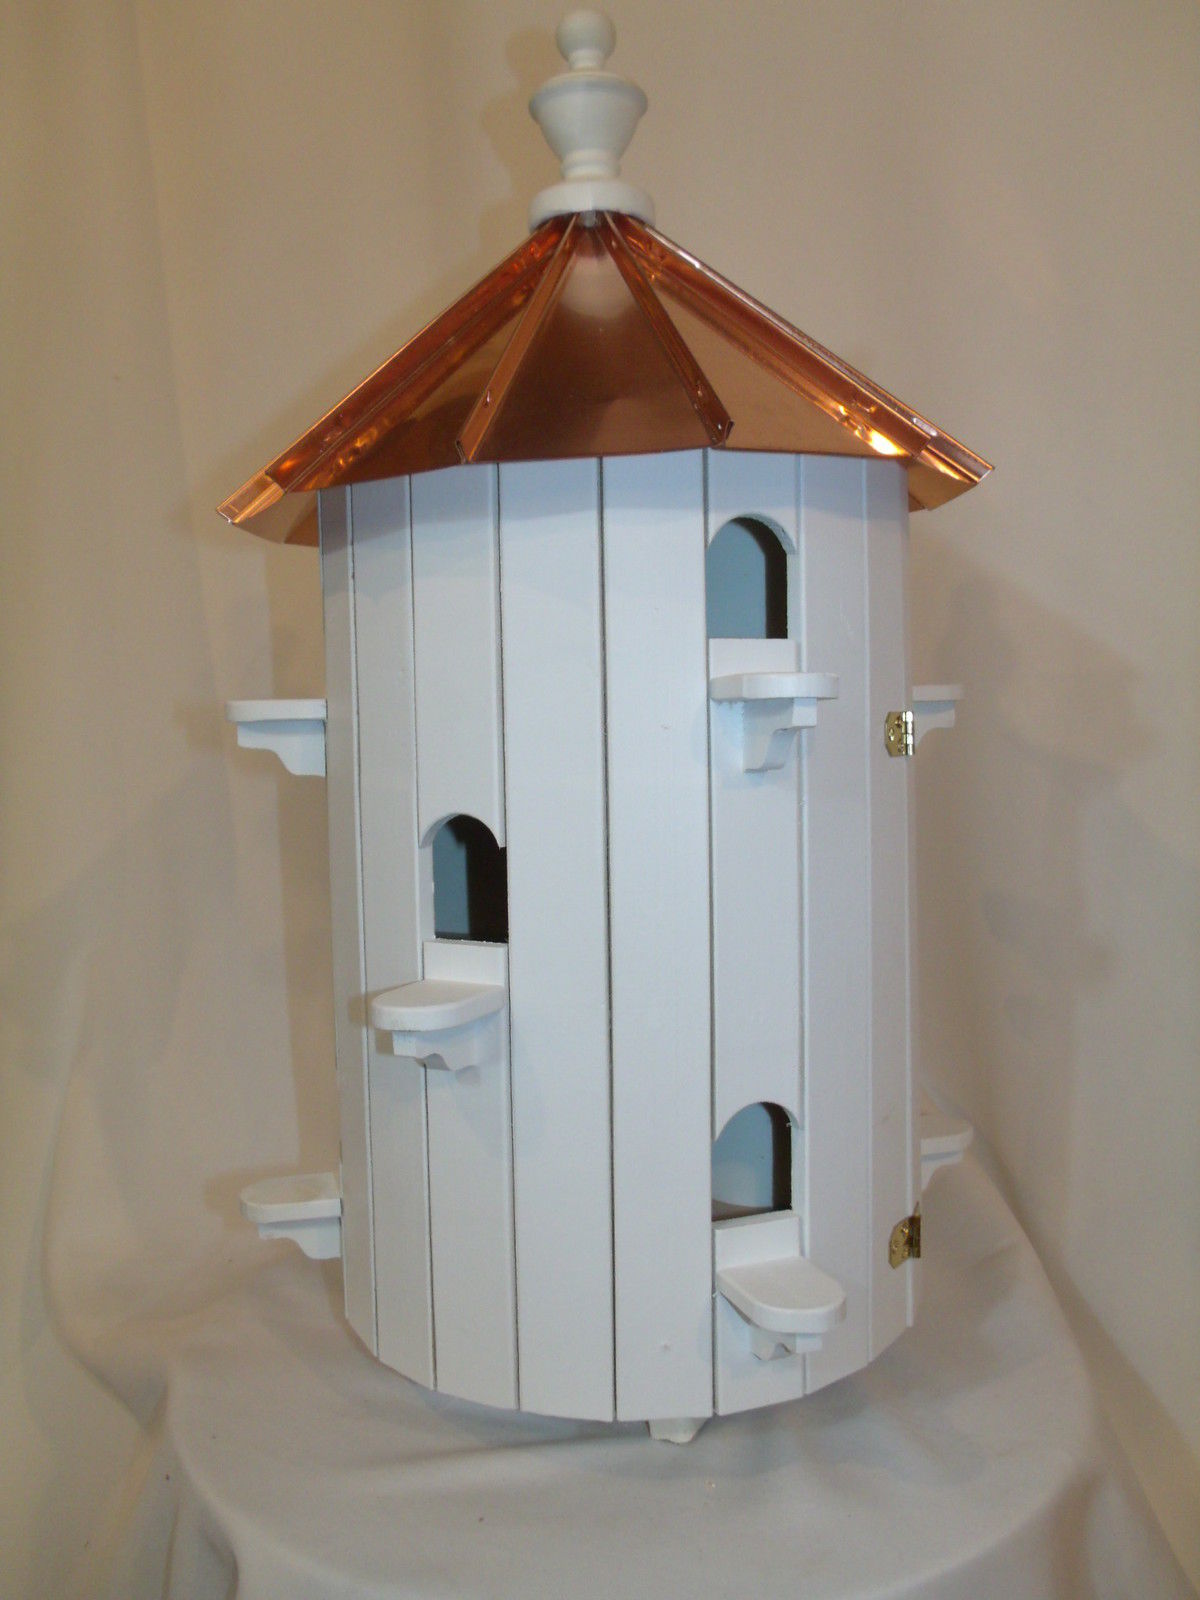 10 Hole Bird House with Polished Copper Roof - 26 inches Tall